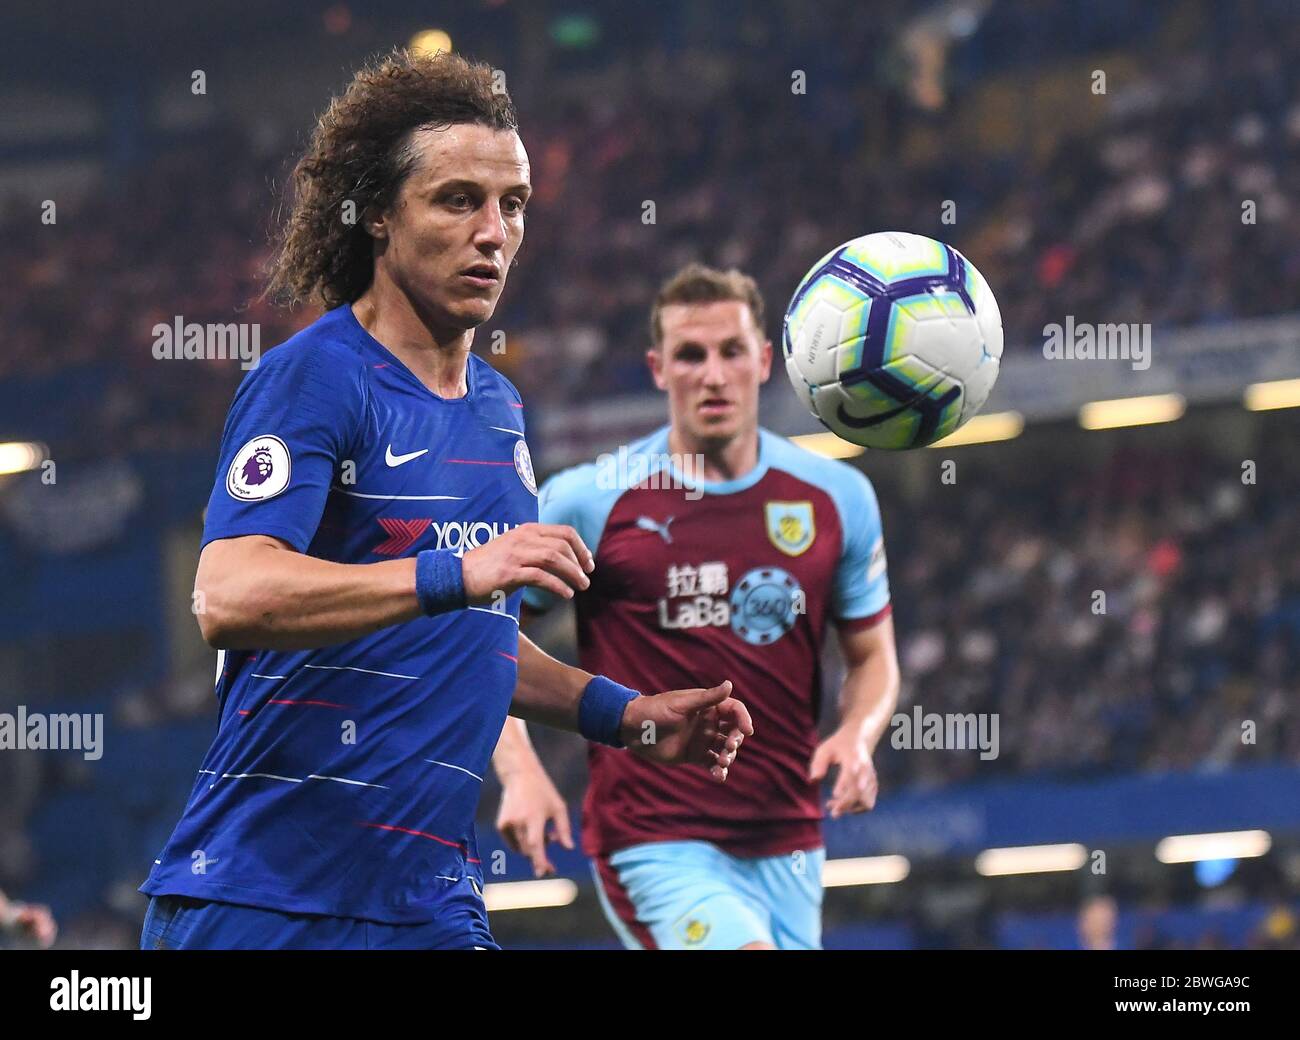 LONDON, ENGLAND - APRIL 22, 2019: David Luiz of Chelsea pictured during the 2018/19 Premier League game between Chelsea FC and Burnley FC at Stamford Bridge. Stock Photo